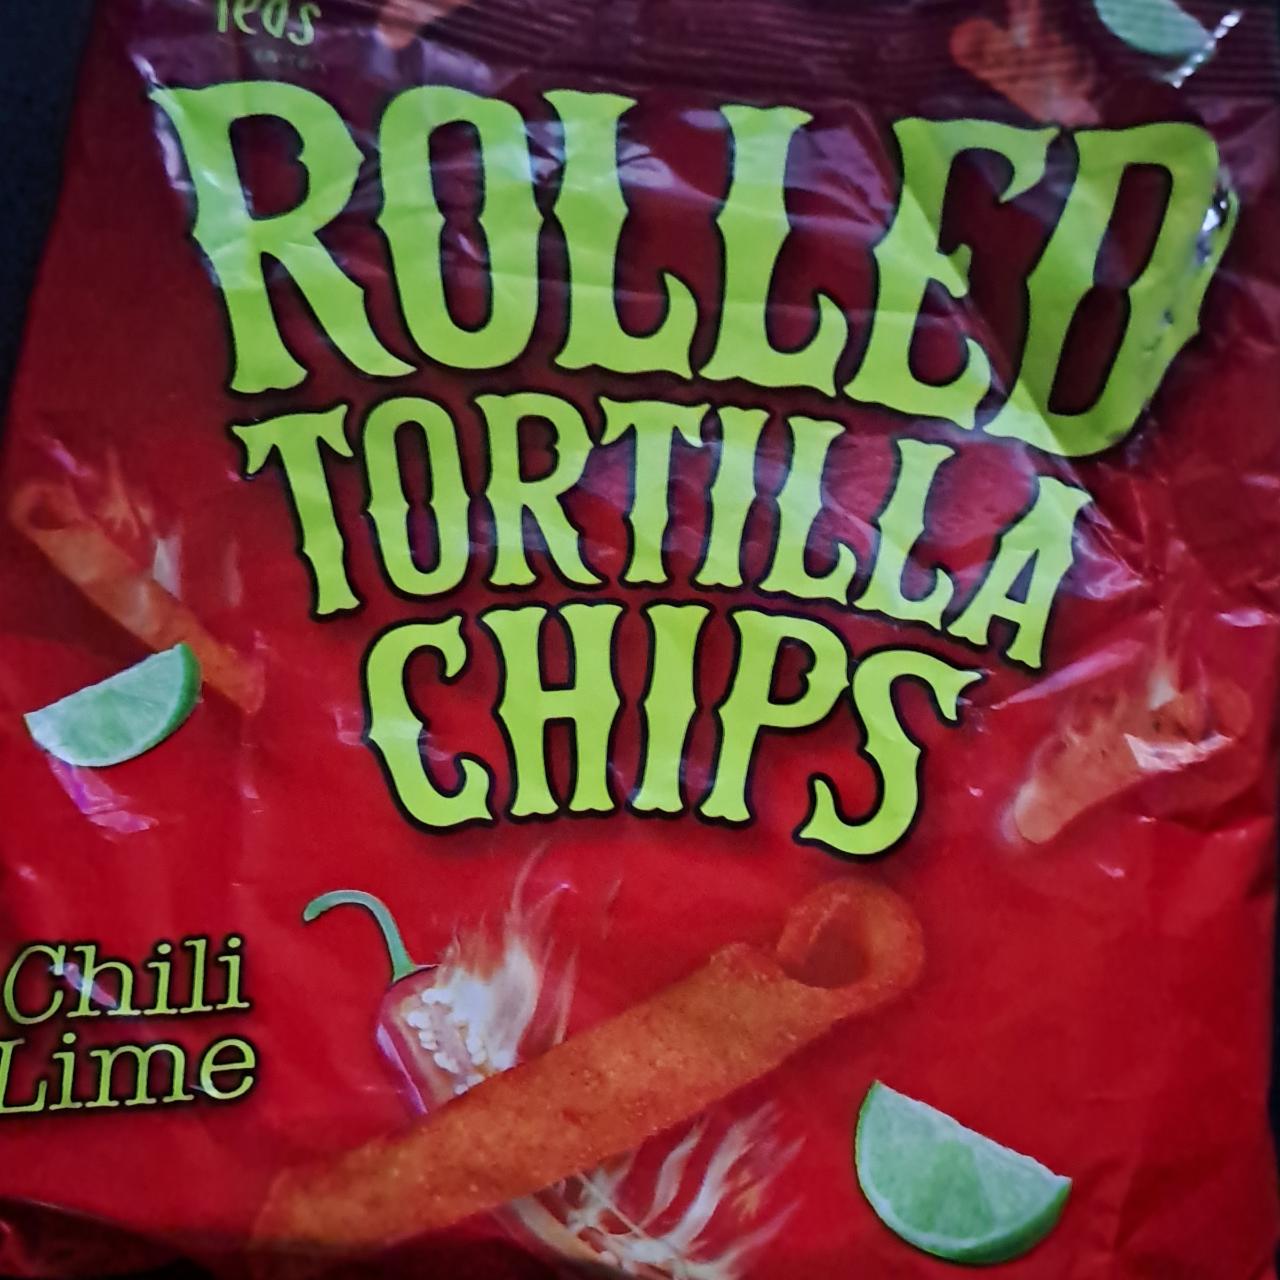 Fotografie - Rolled Tortilla Chips Chili Lime